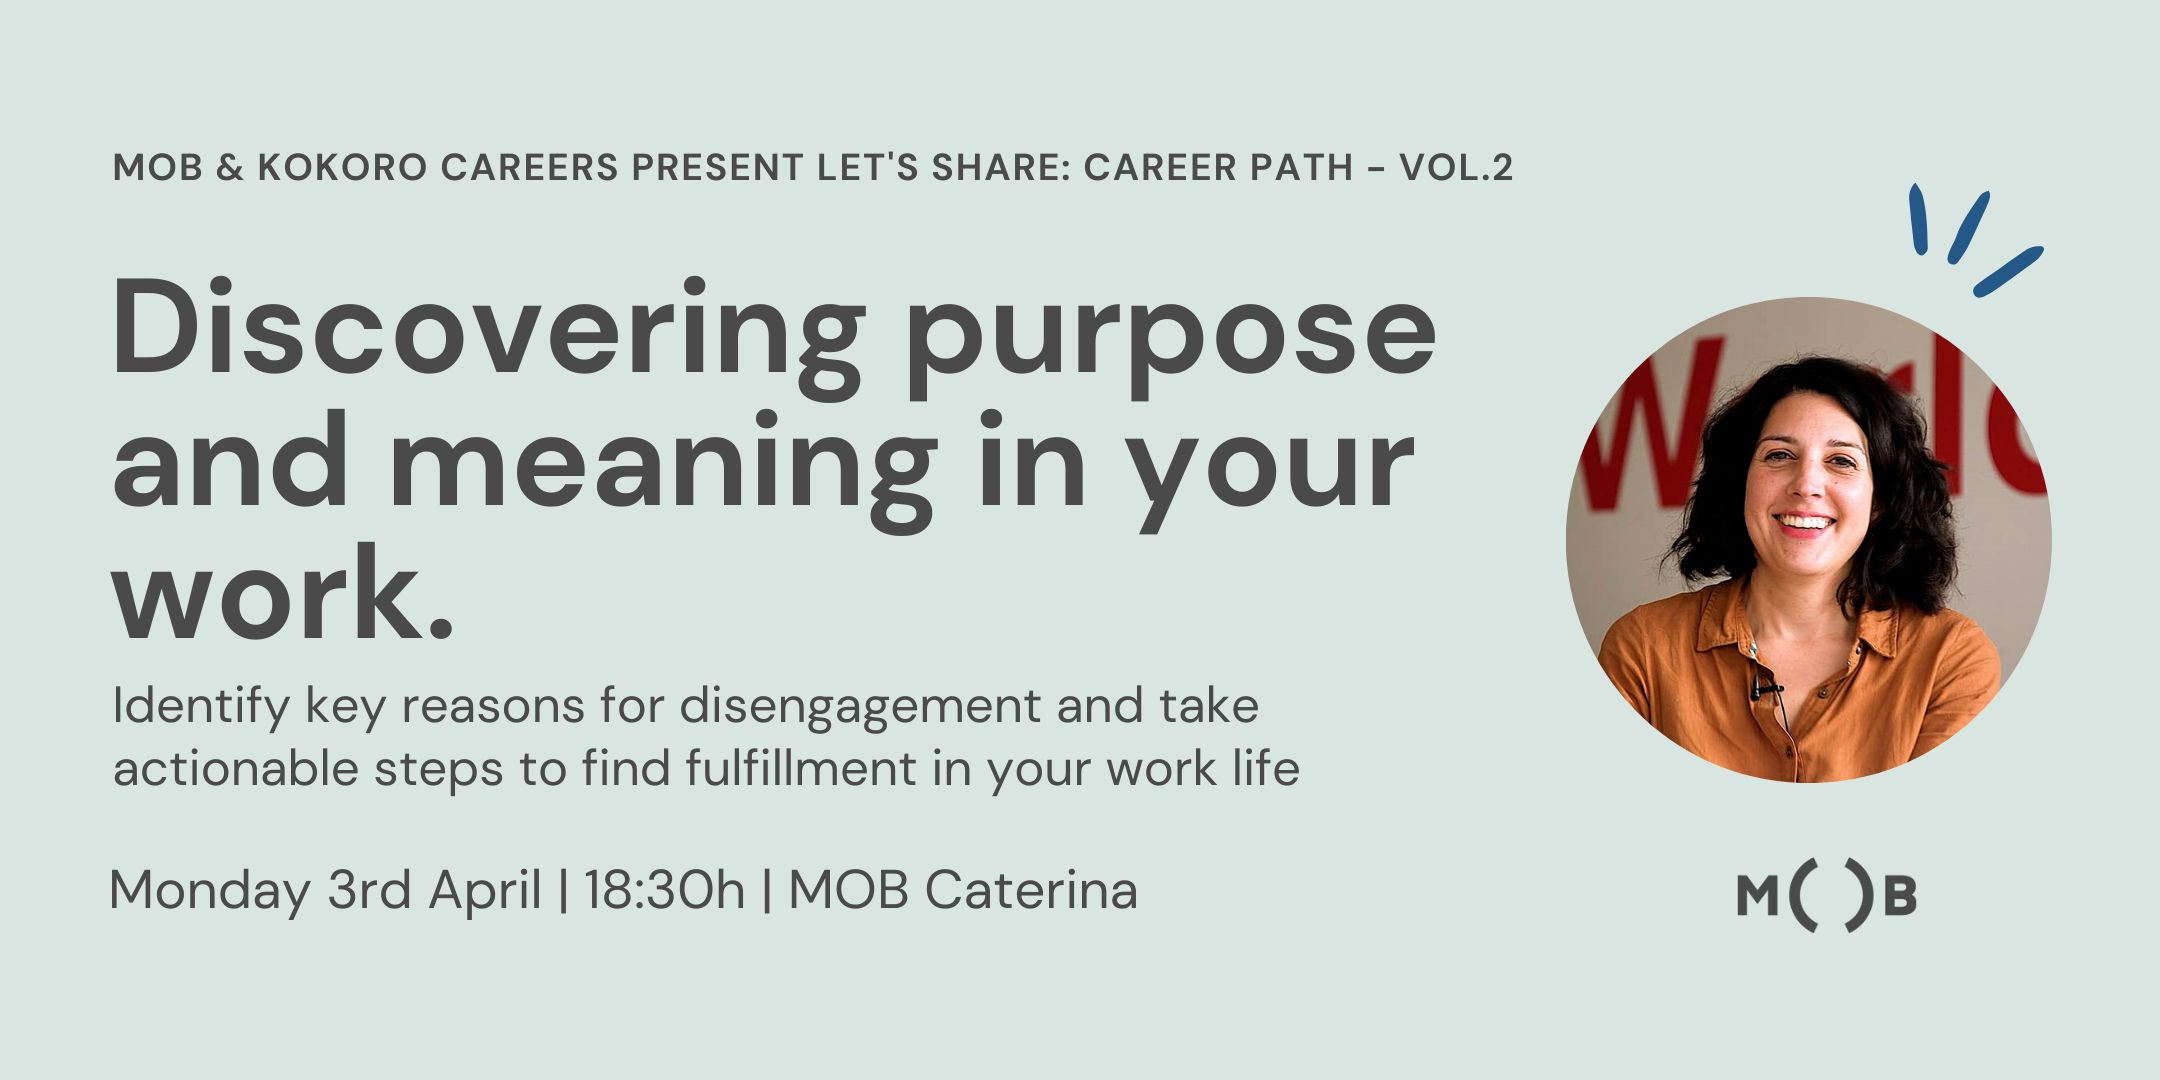 Career Path “Discovering purpose and meaning in your work” - Coworking Barcelona